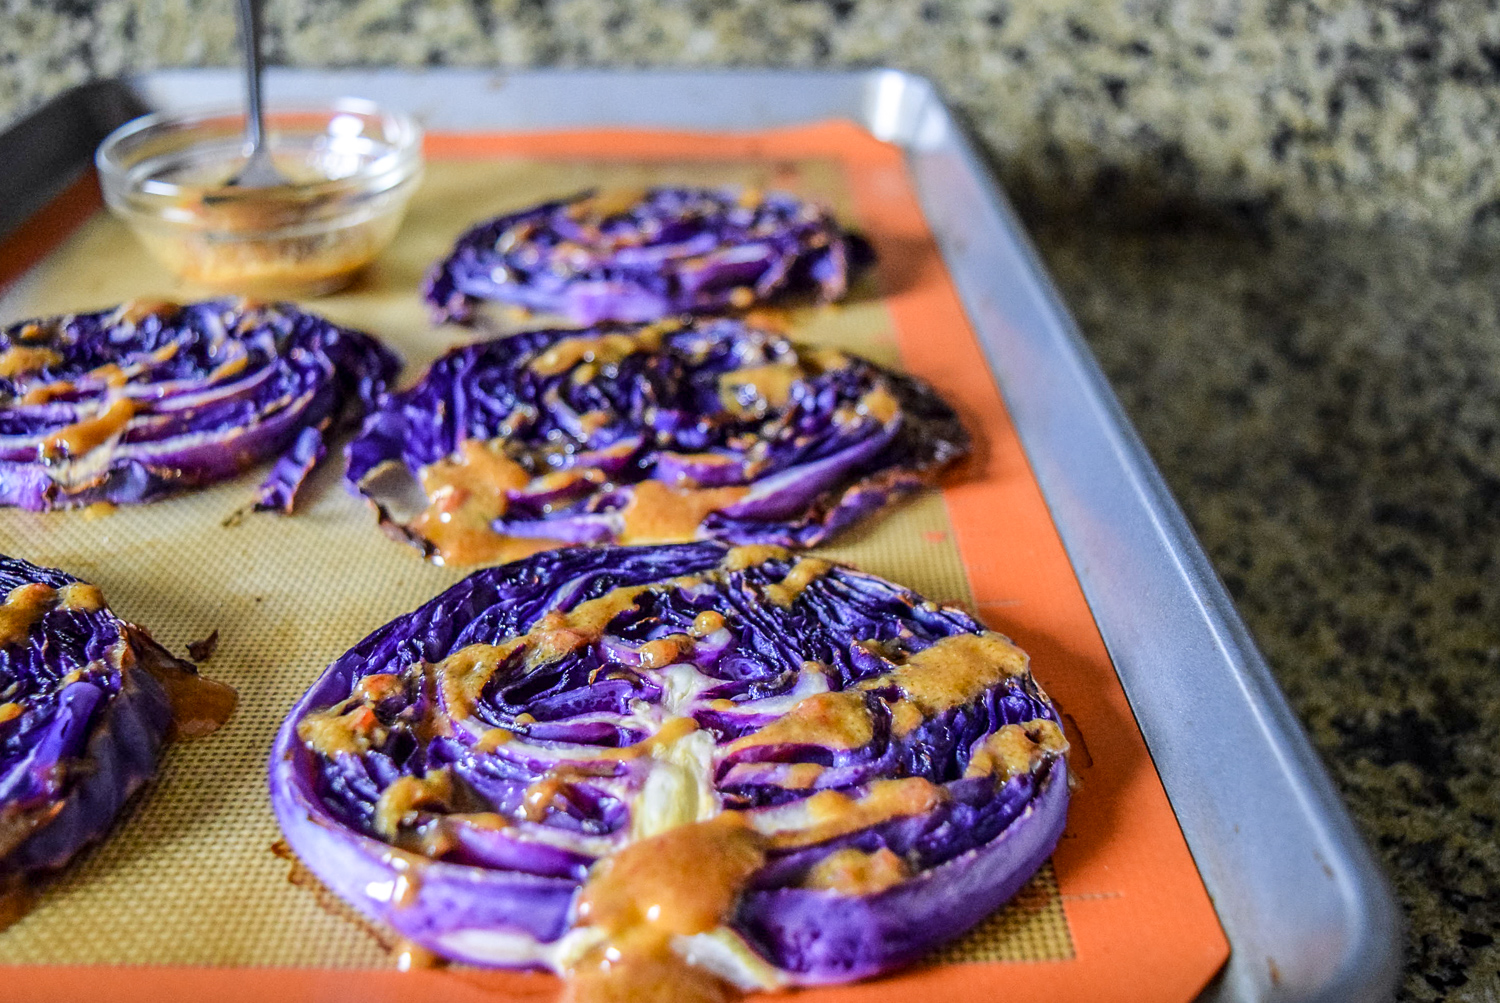 One pan meal of roasted red cabbage steaks drizzled with chili miso sauce from side